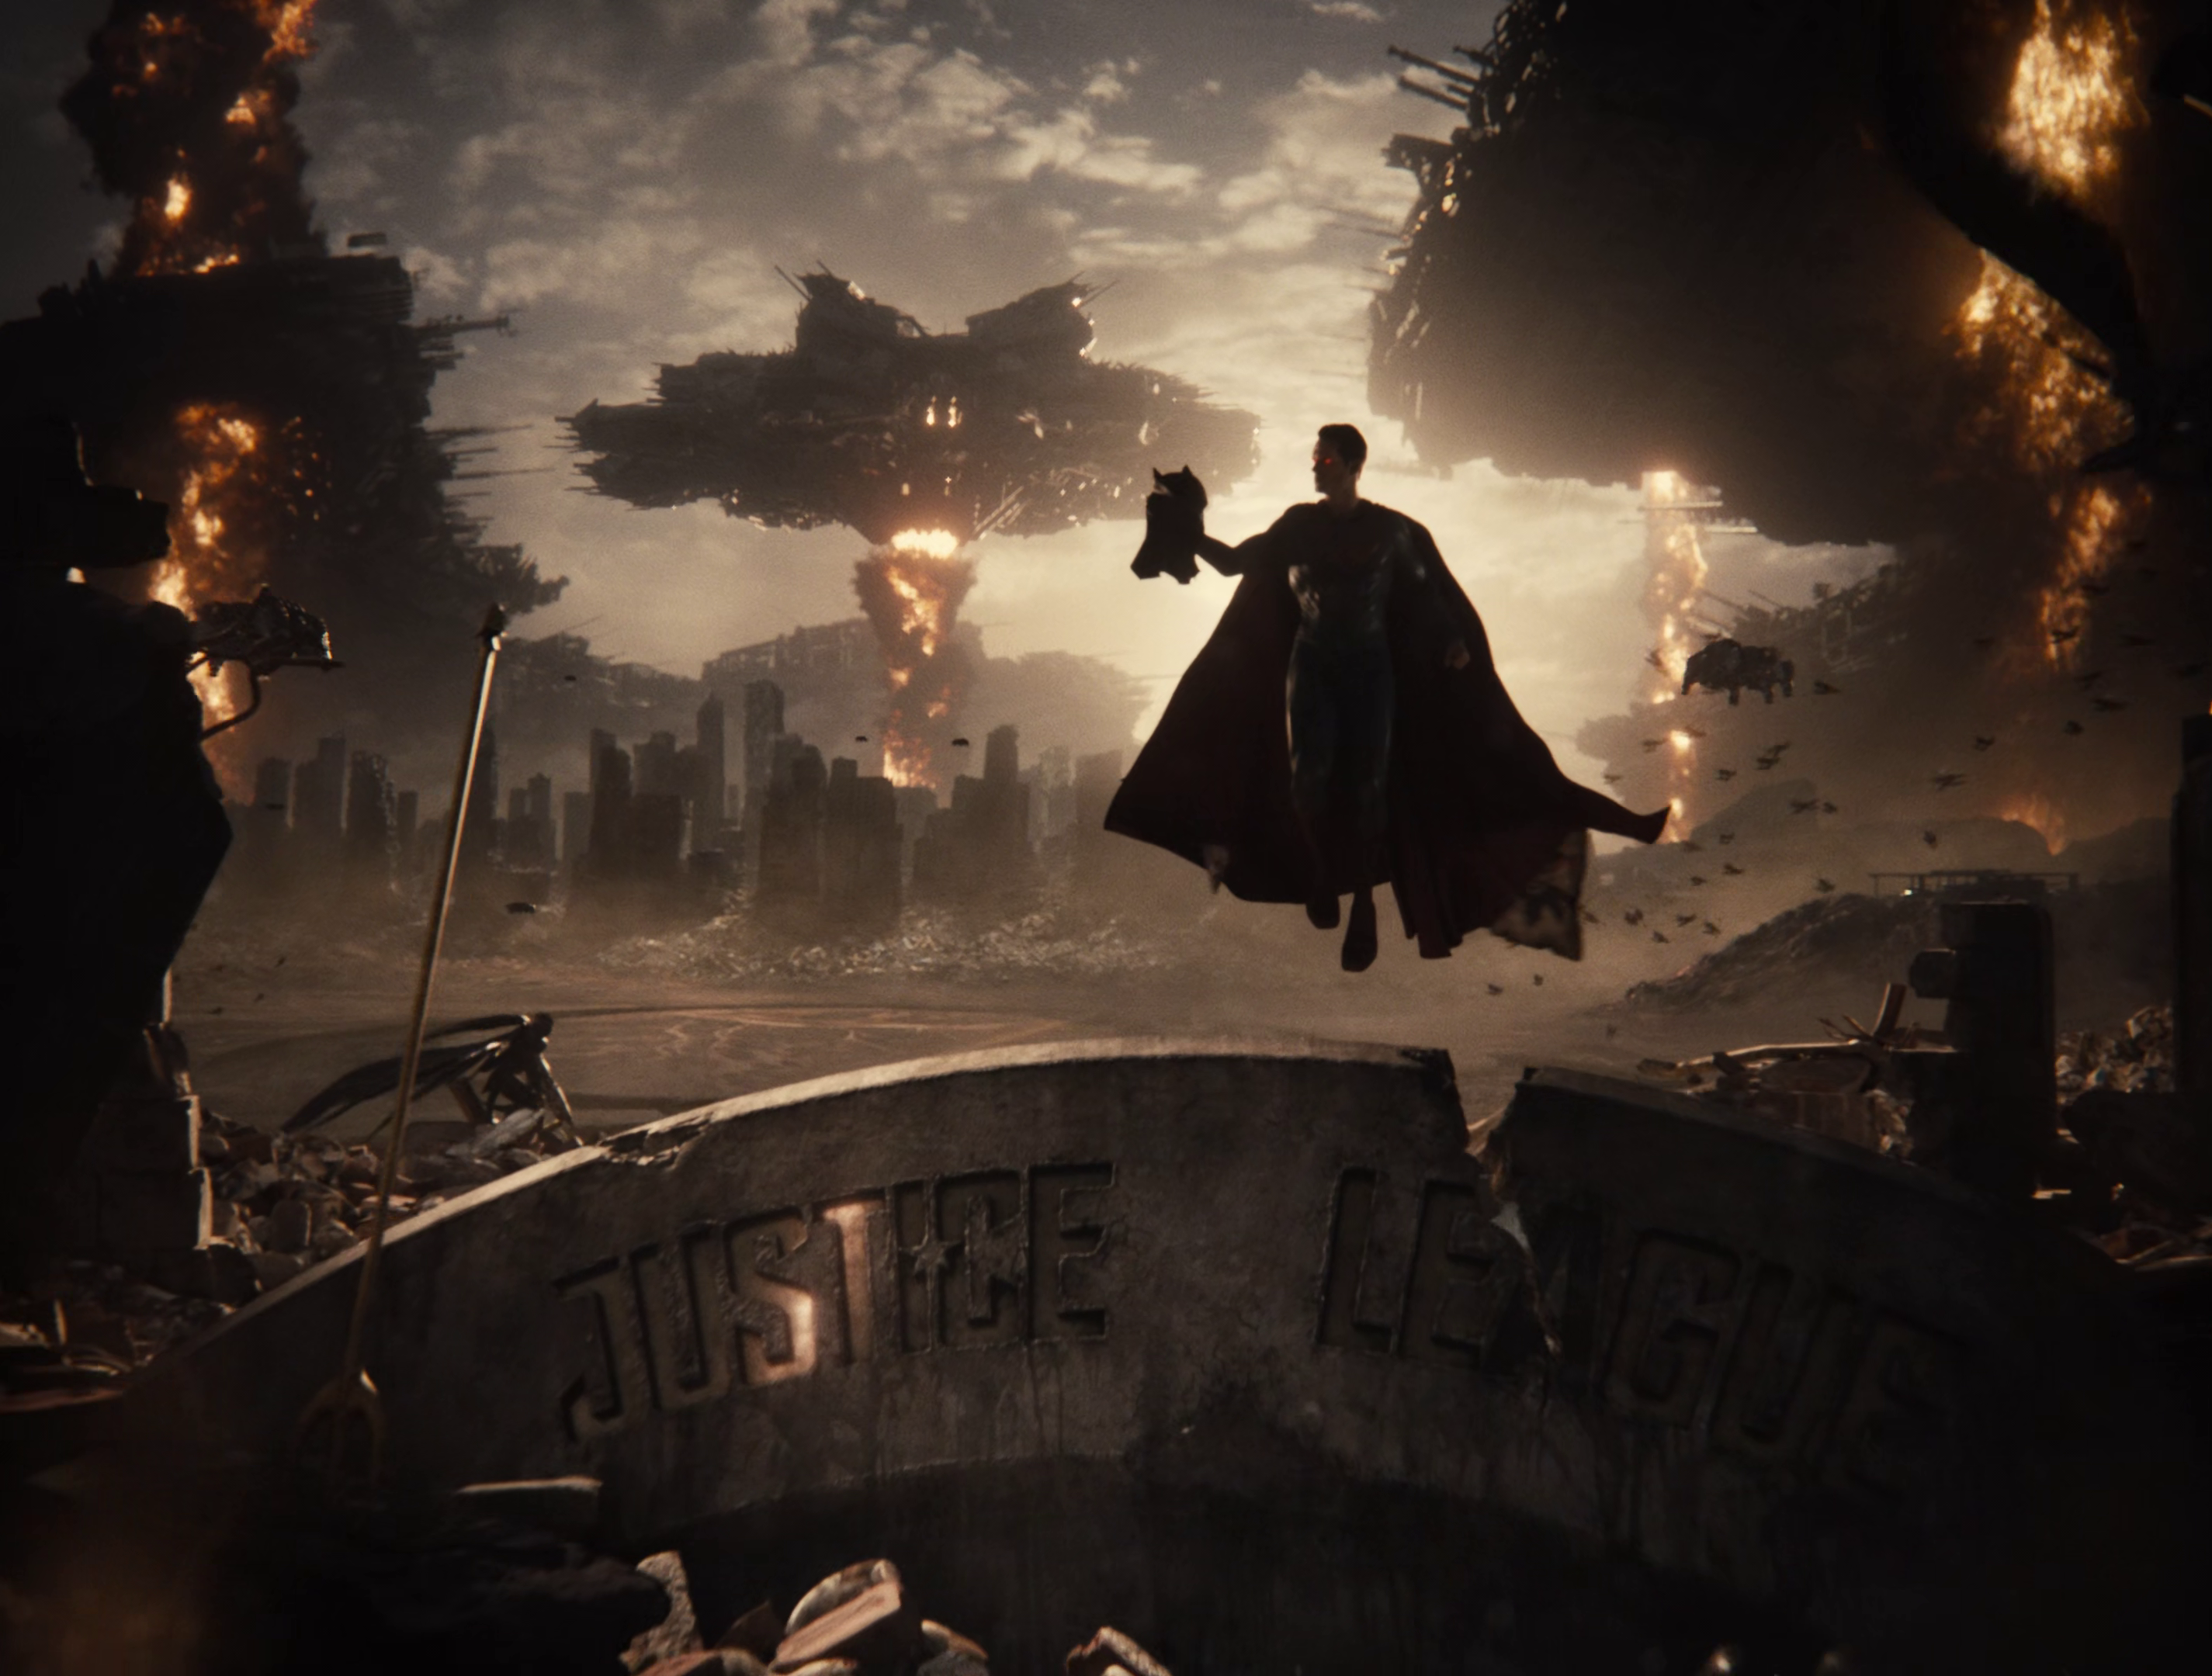 Justice League Knightmare Zack Snyder Art Wallpapers